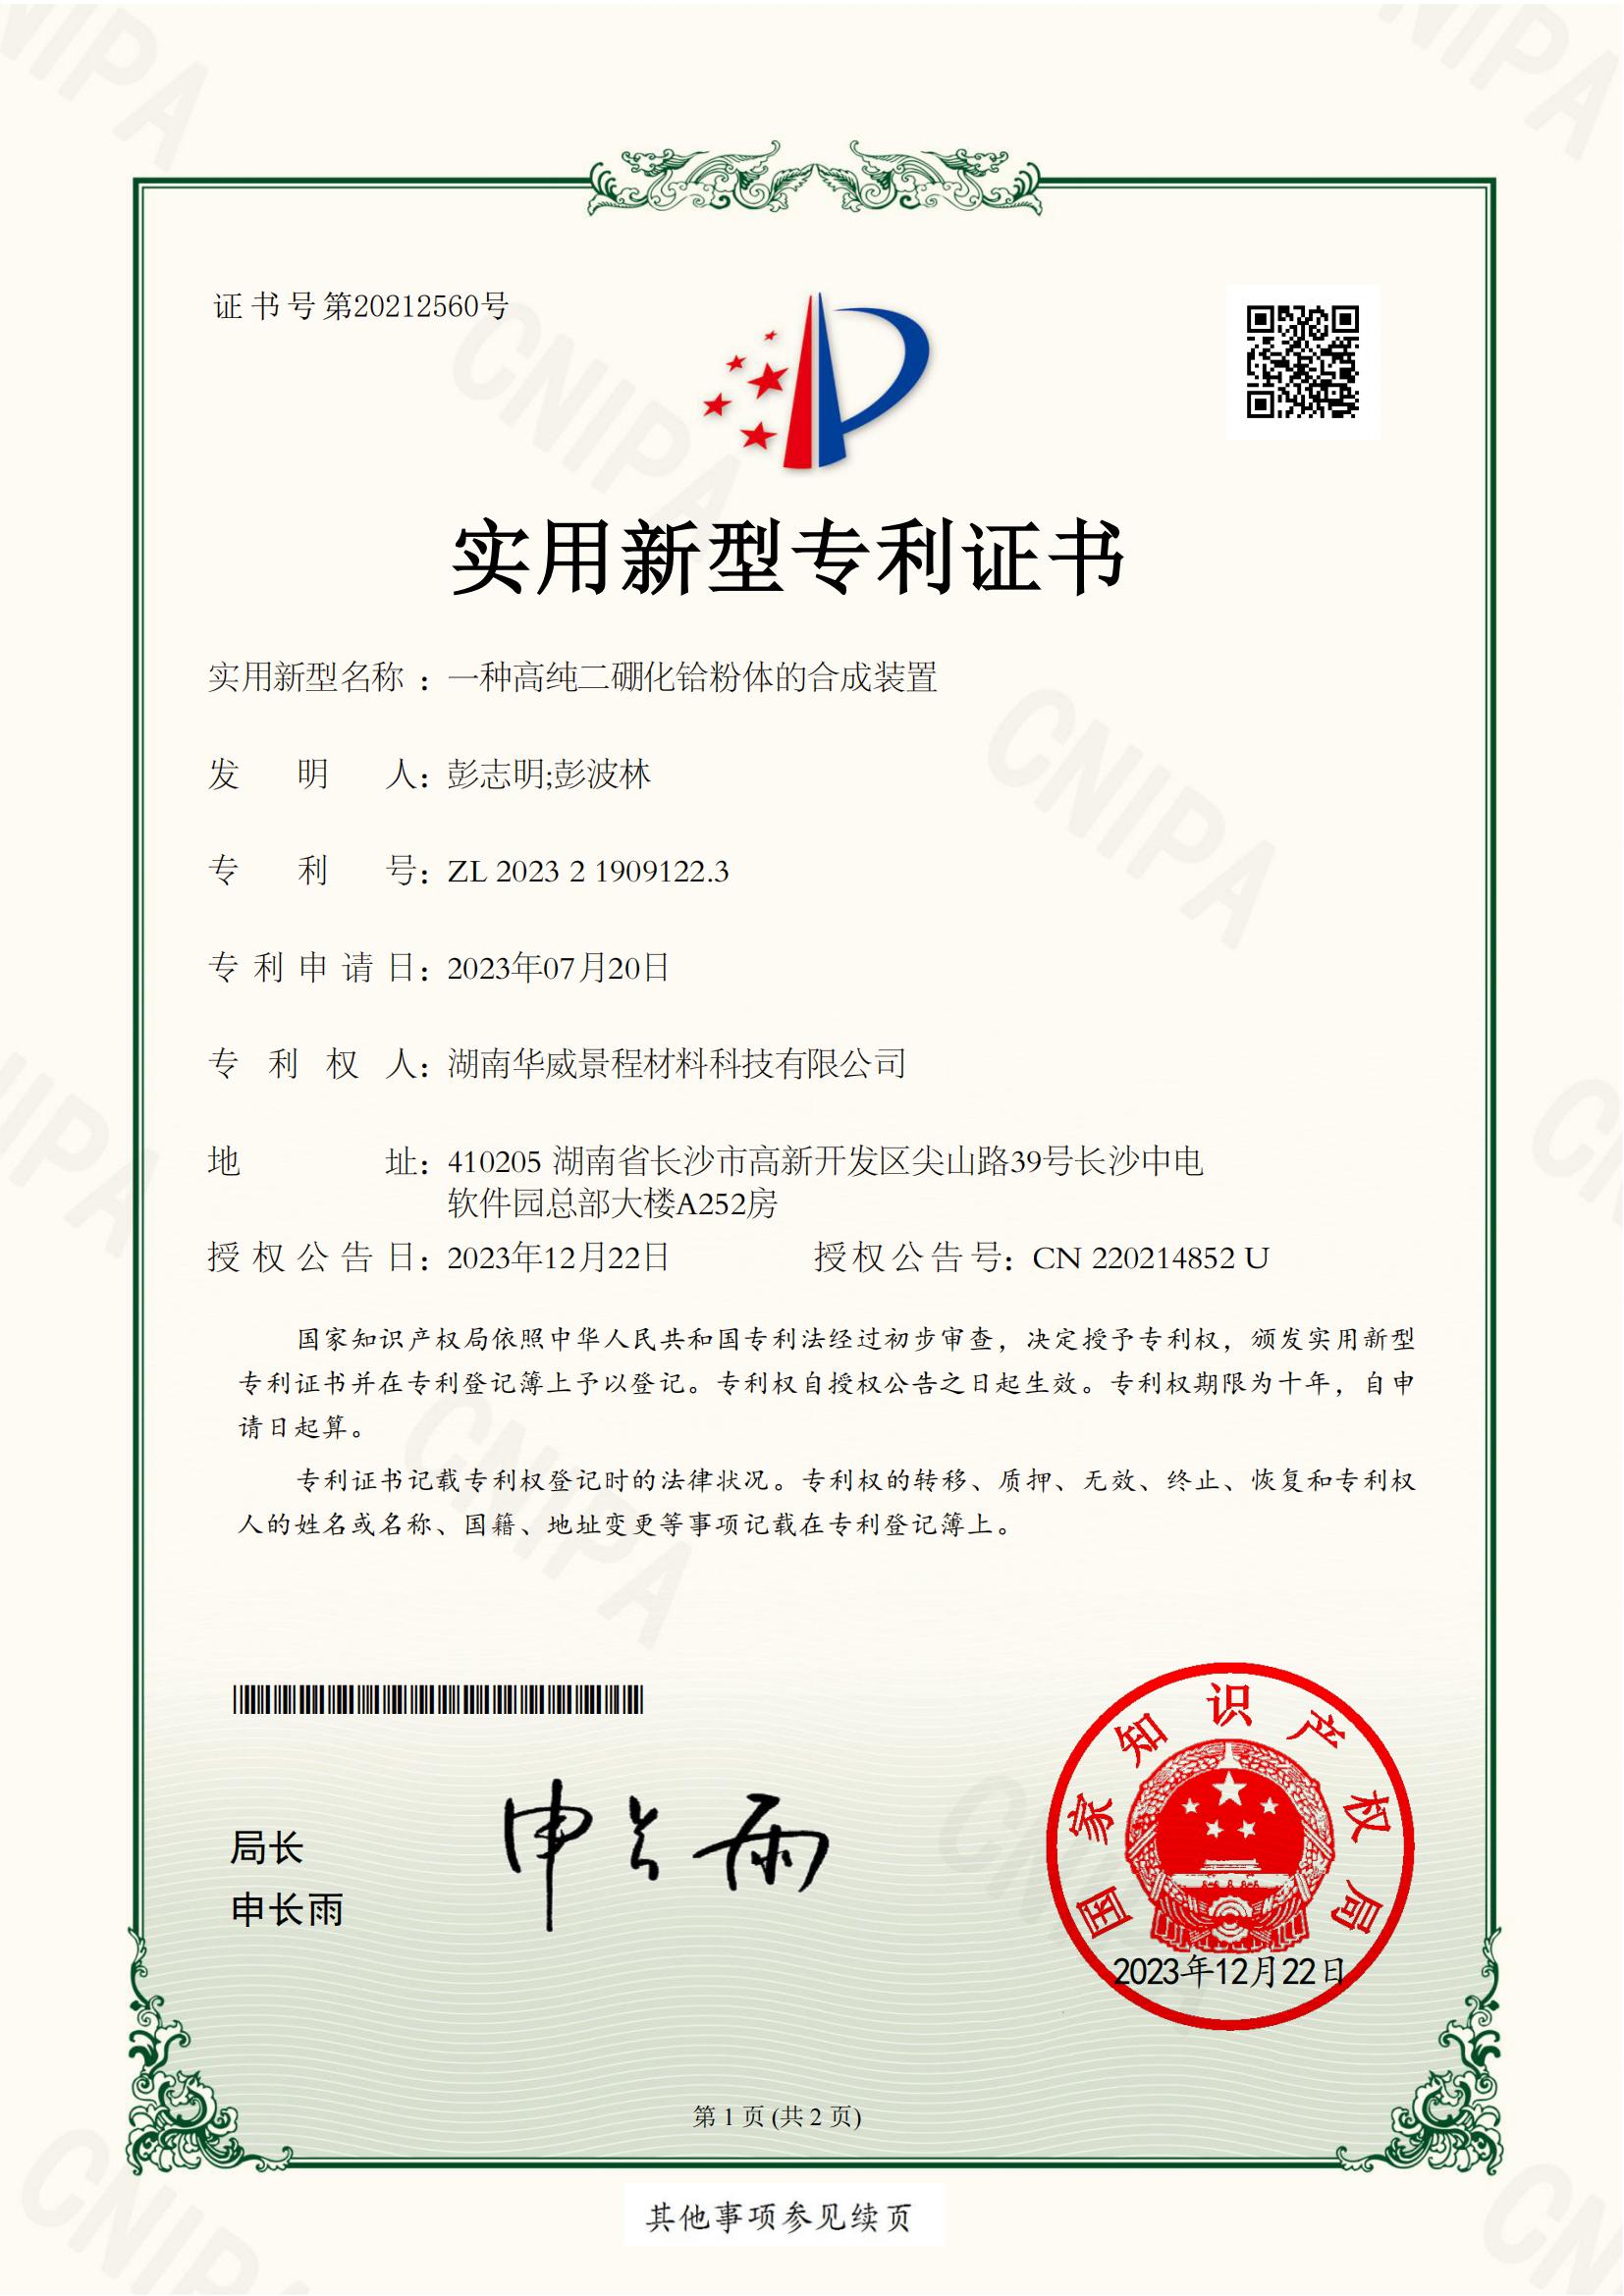 Certificate of Utility Model Patent of HfB2 powder Synthesis 